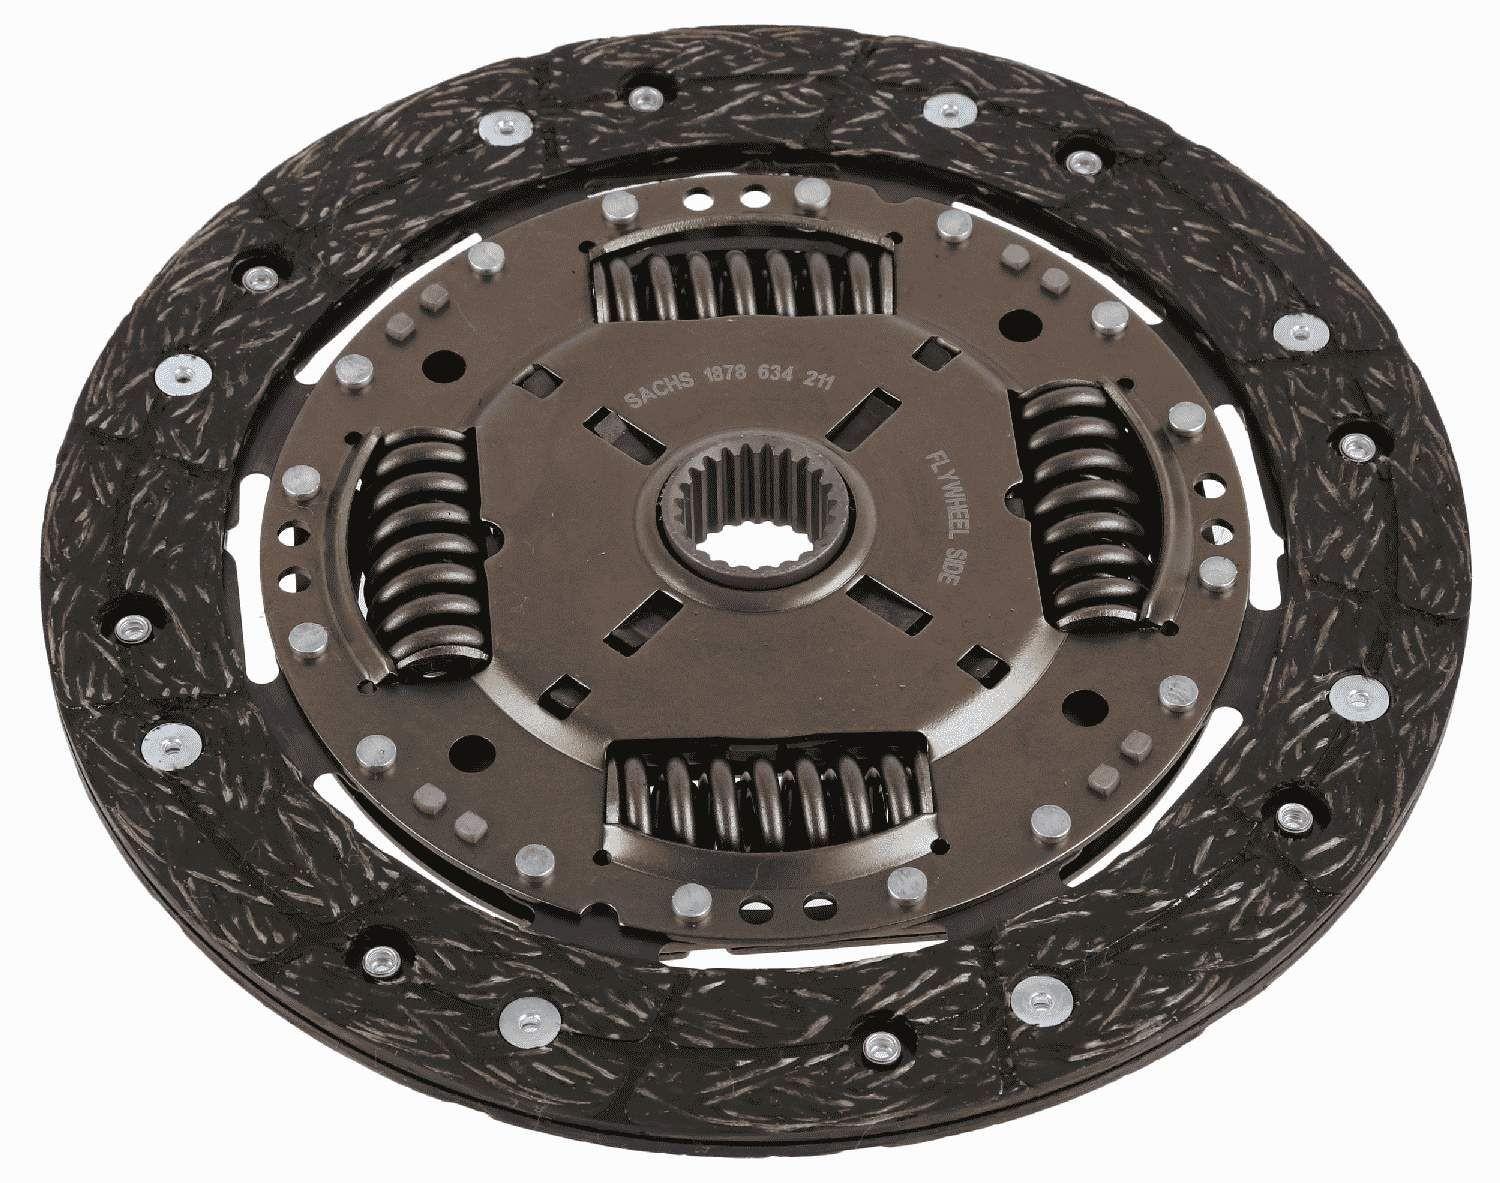 SACHS 1878 634 211 Clutch Disc 228mm, Number of Teeth: 23